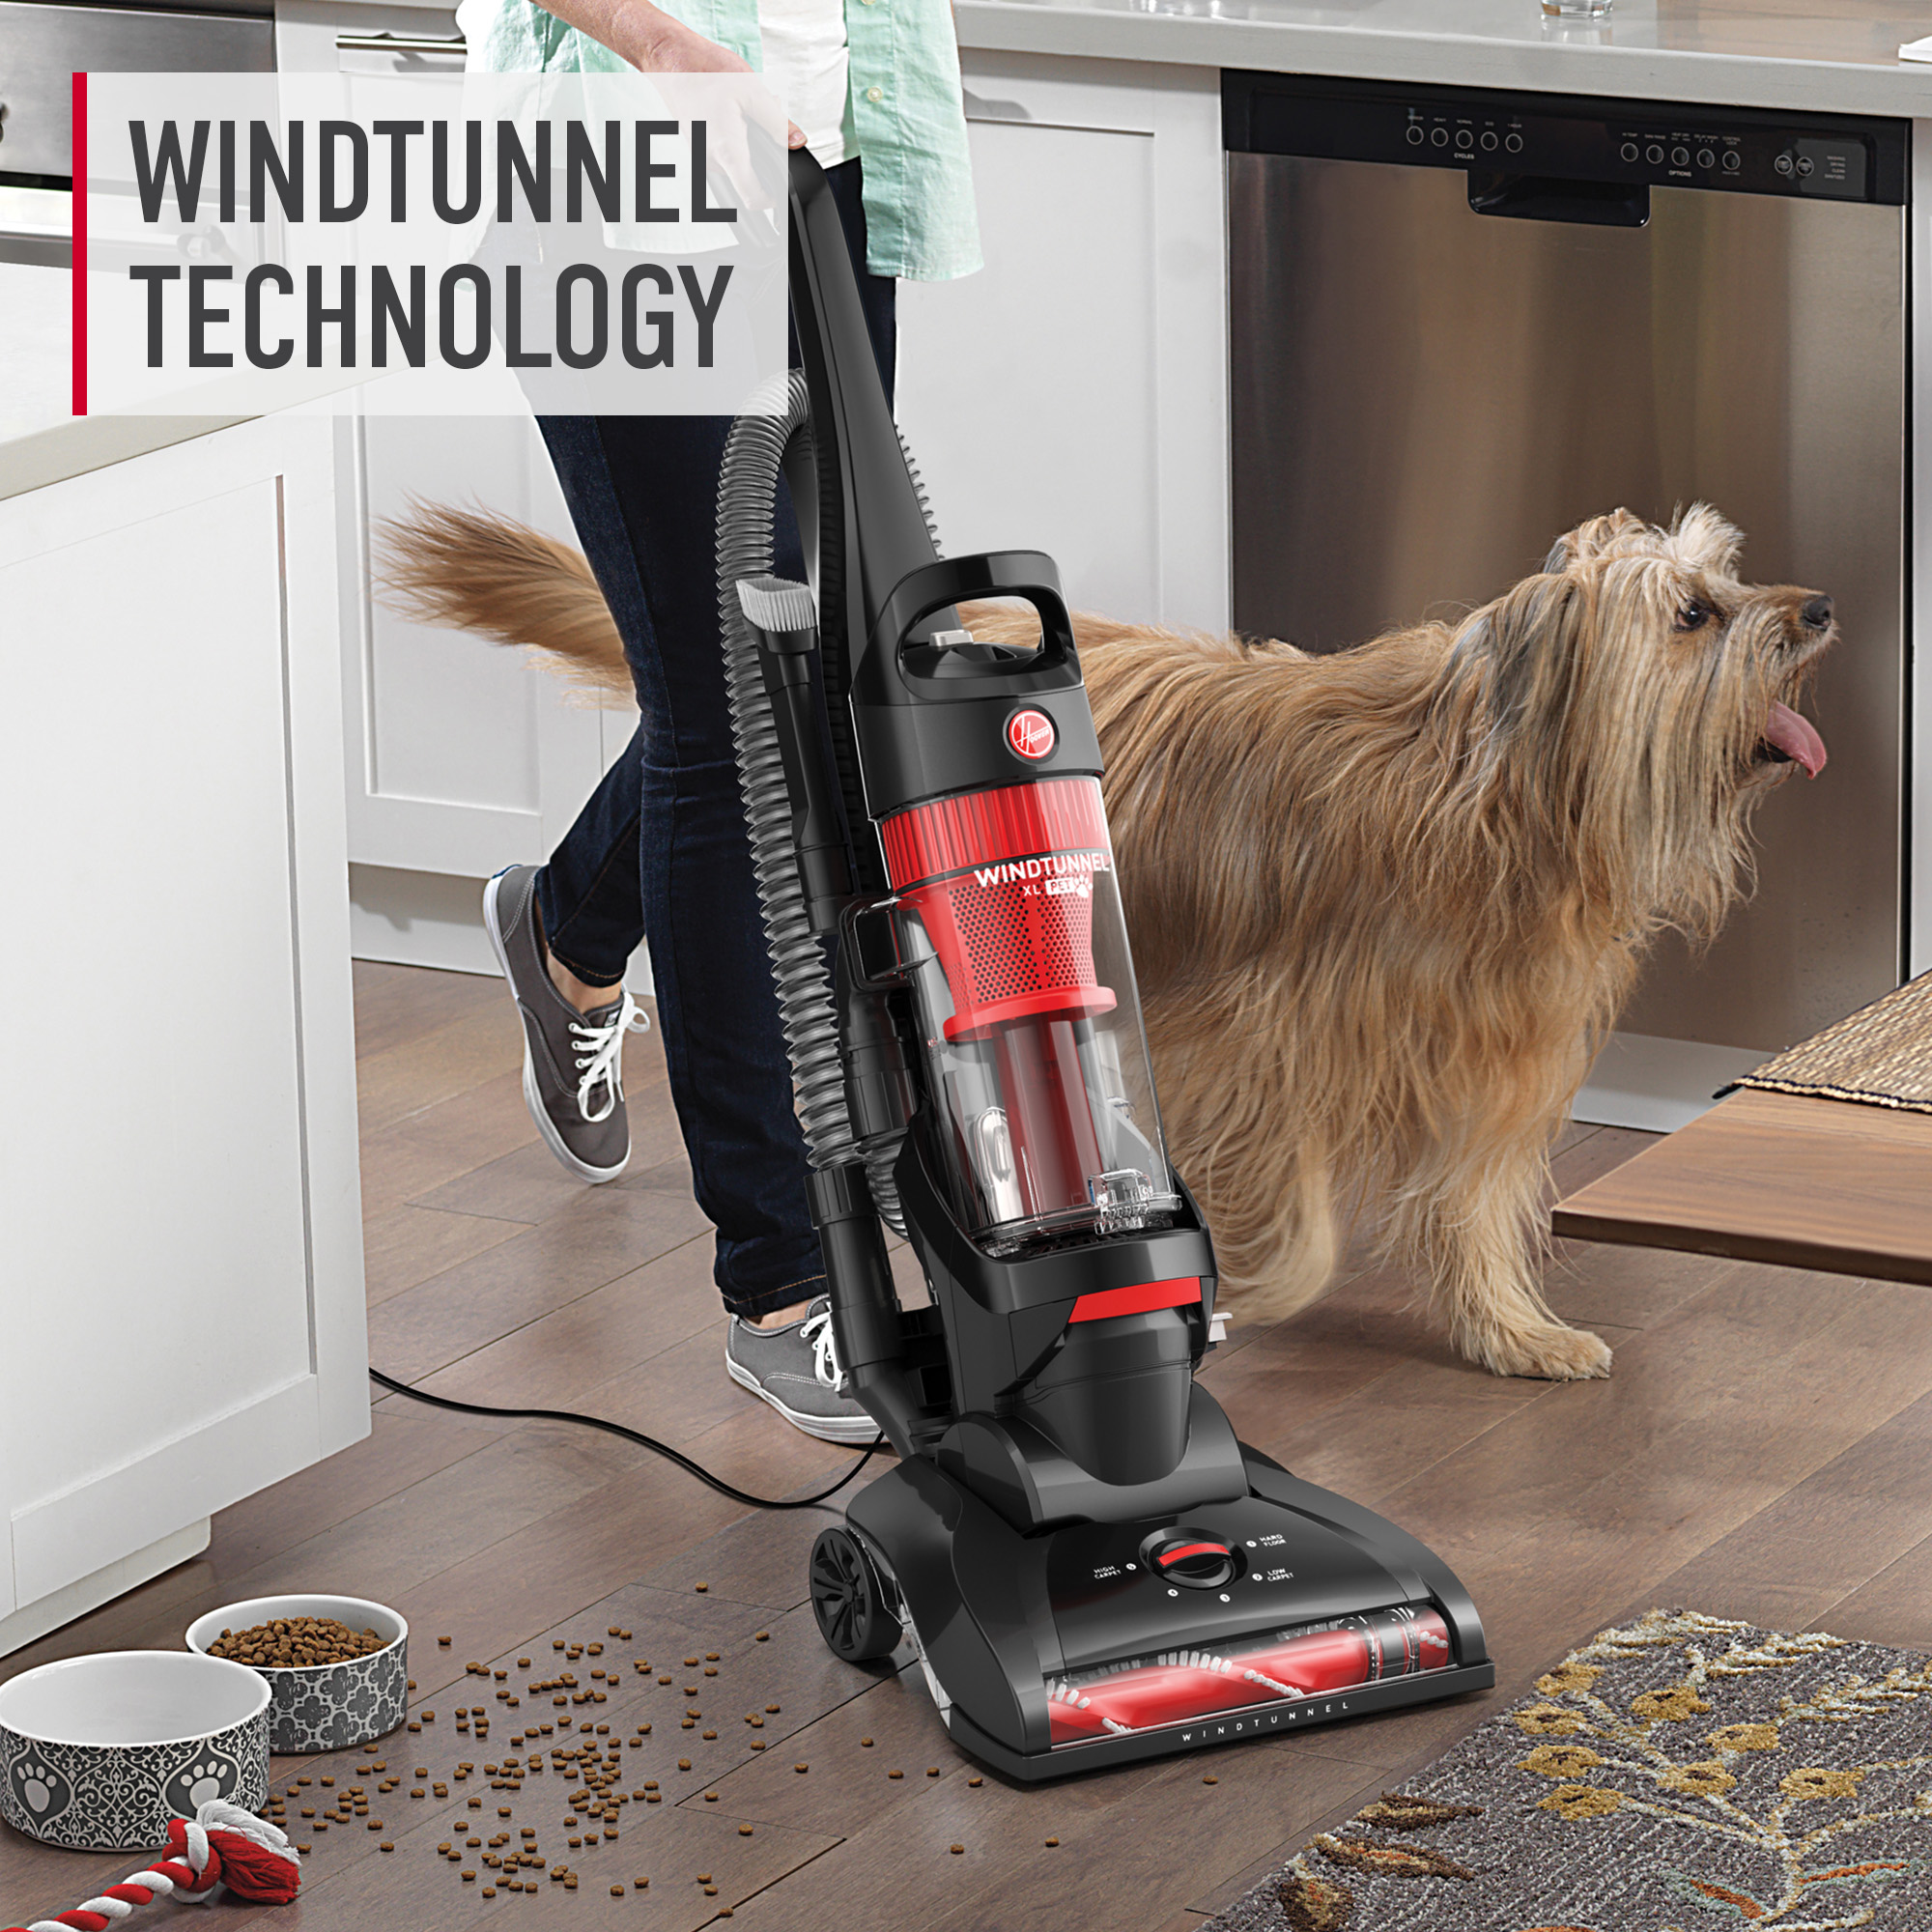 Hoover Wind Tunnel XL Pet Bagless Upright Vacuum, UH71107, New - image 2 of 5